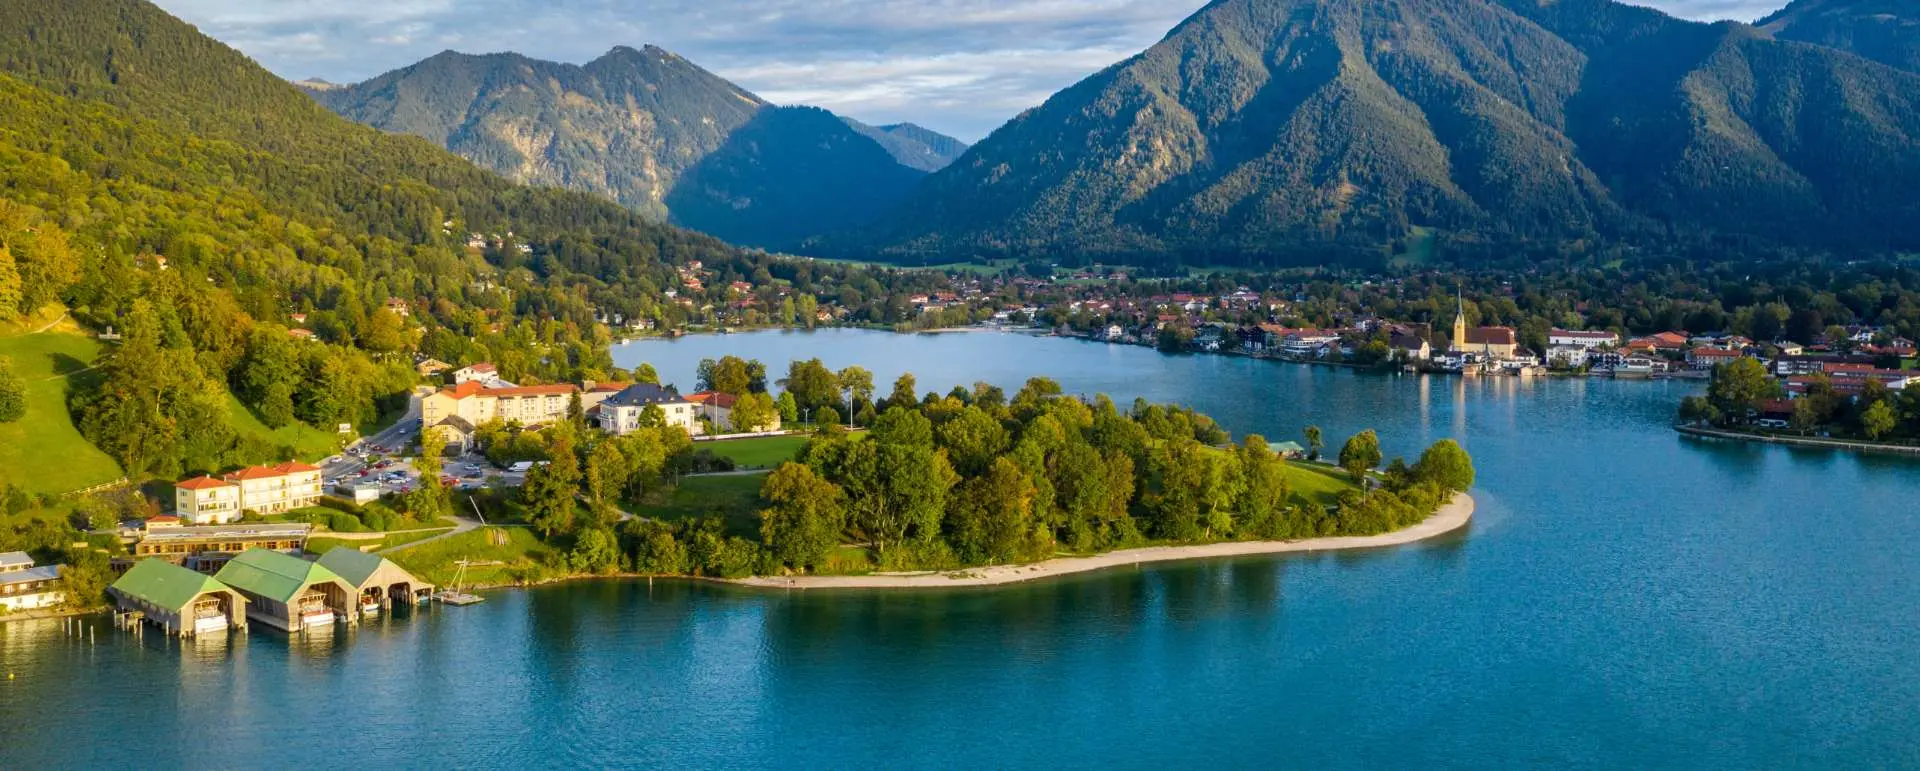 Tegernsee - the destination for groups